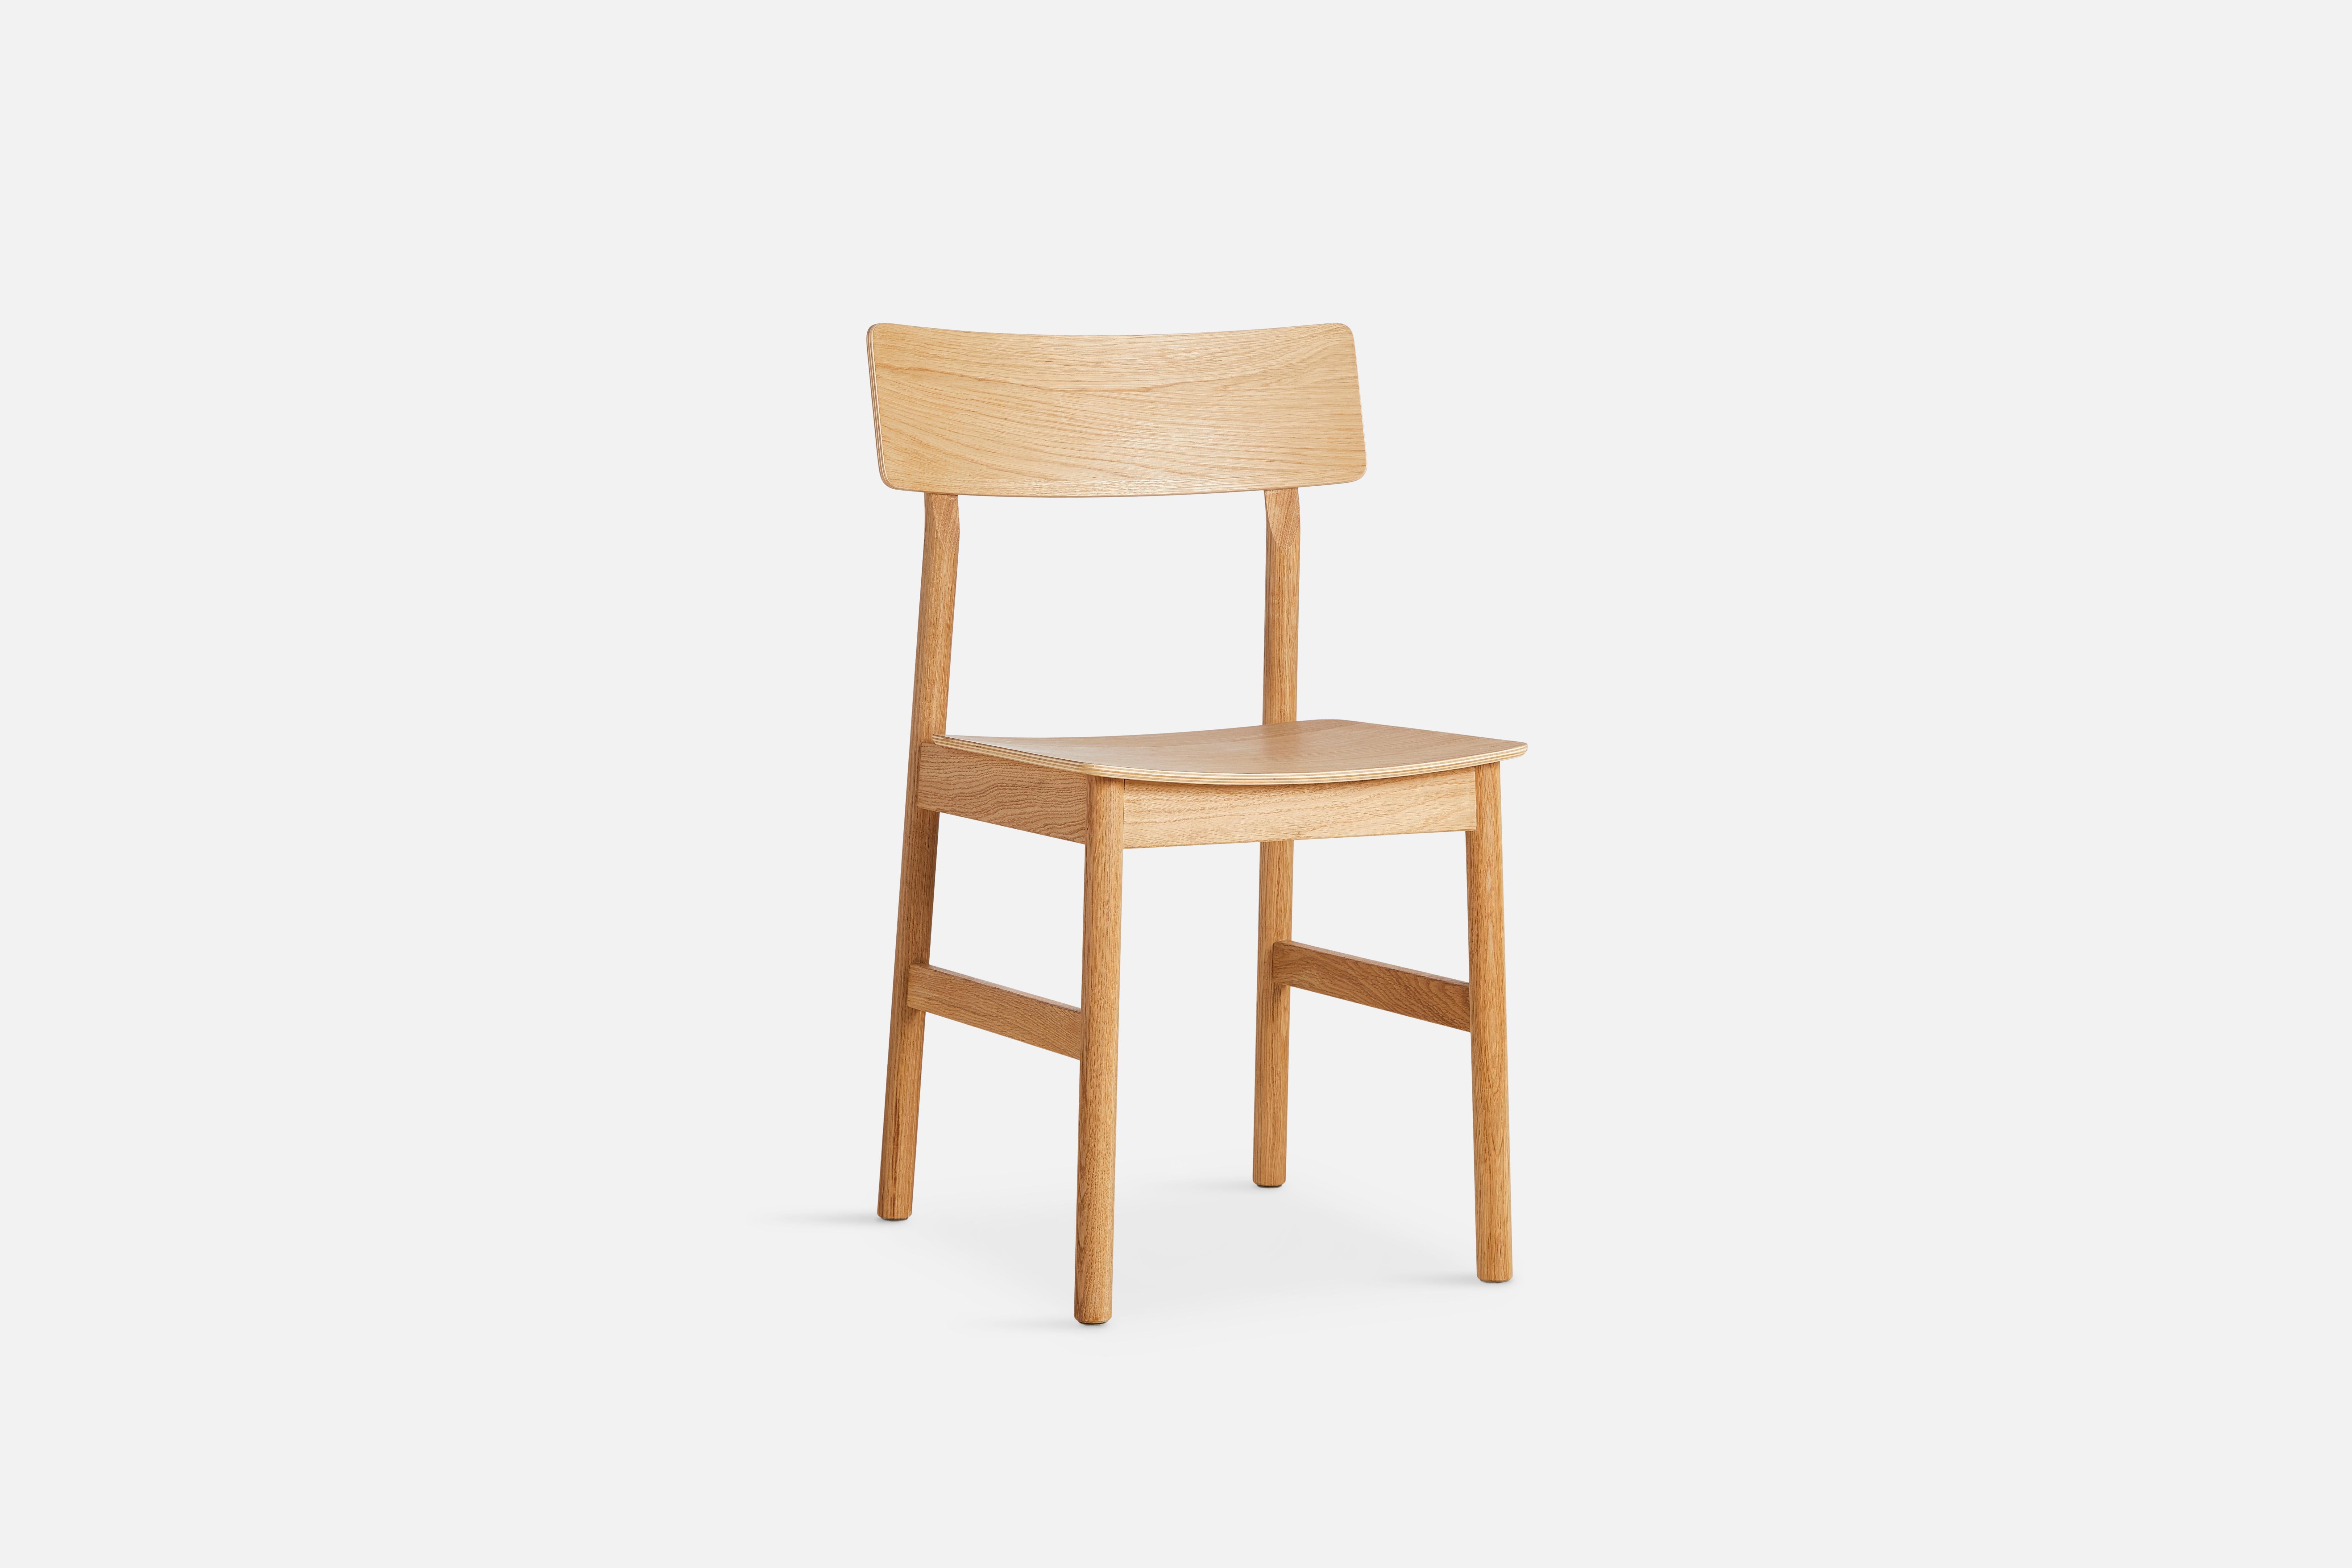 Pause Oiled Oak Dining Chair 2.0 by Kasper Nyman.
Materials: Ash, Plywood.
Dimensions: D 47 x W 48 x H 80 cm.
Also available in different colours and finishes. 

The founders, Mia and Torben Koed, decided to put their 30 years of experience